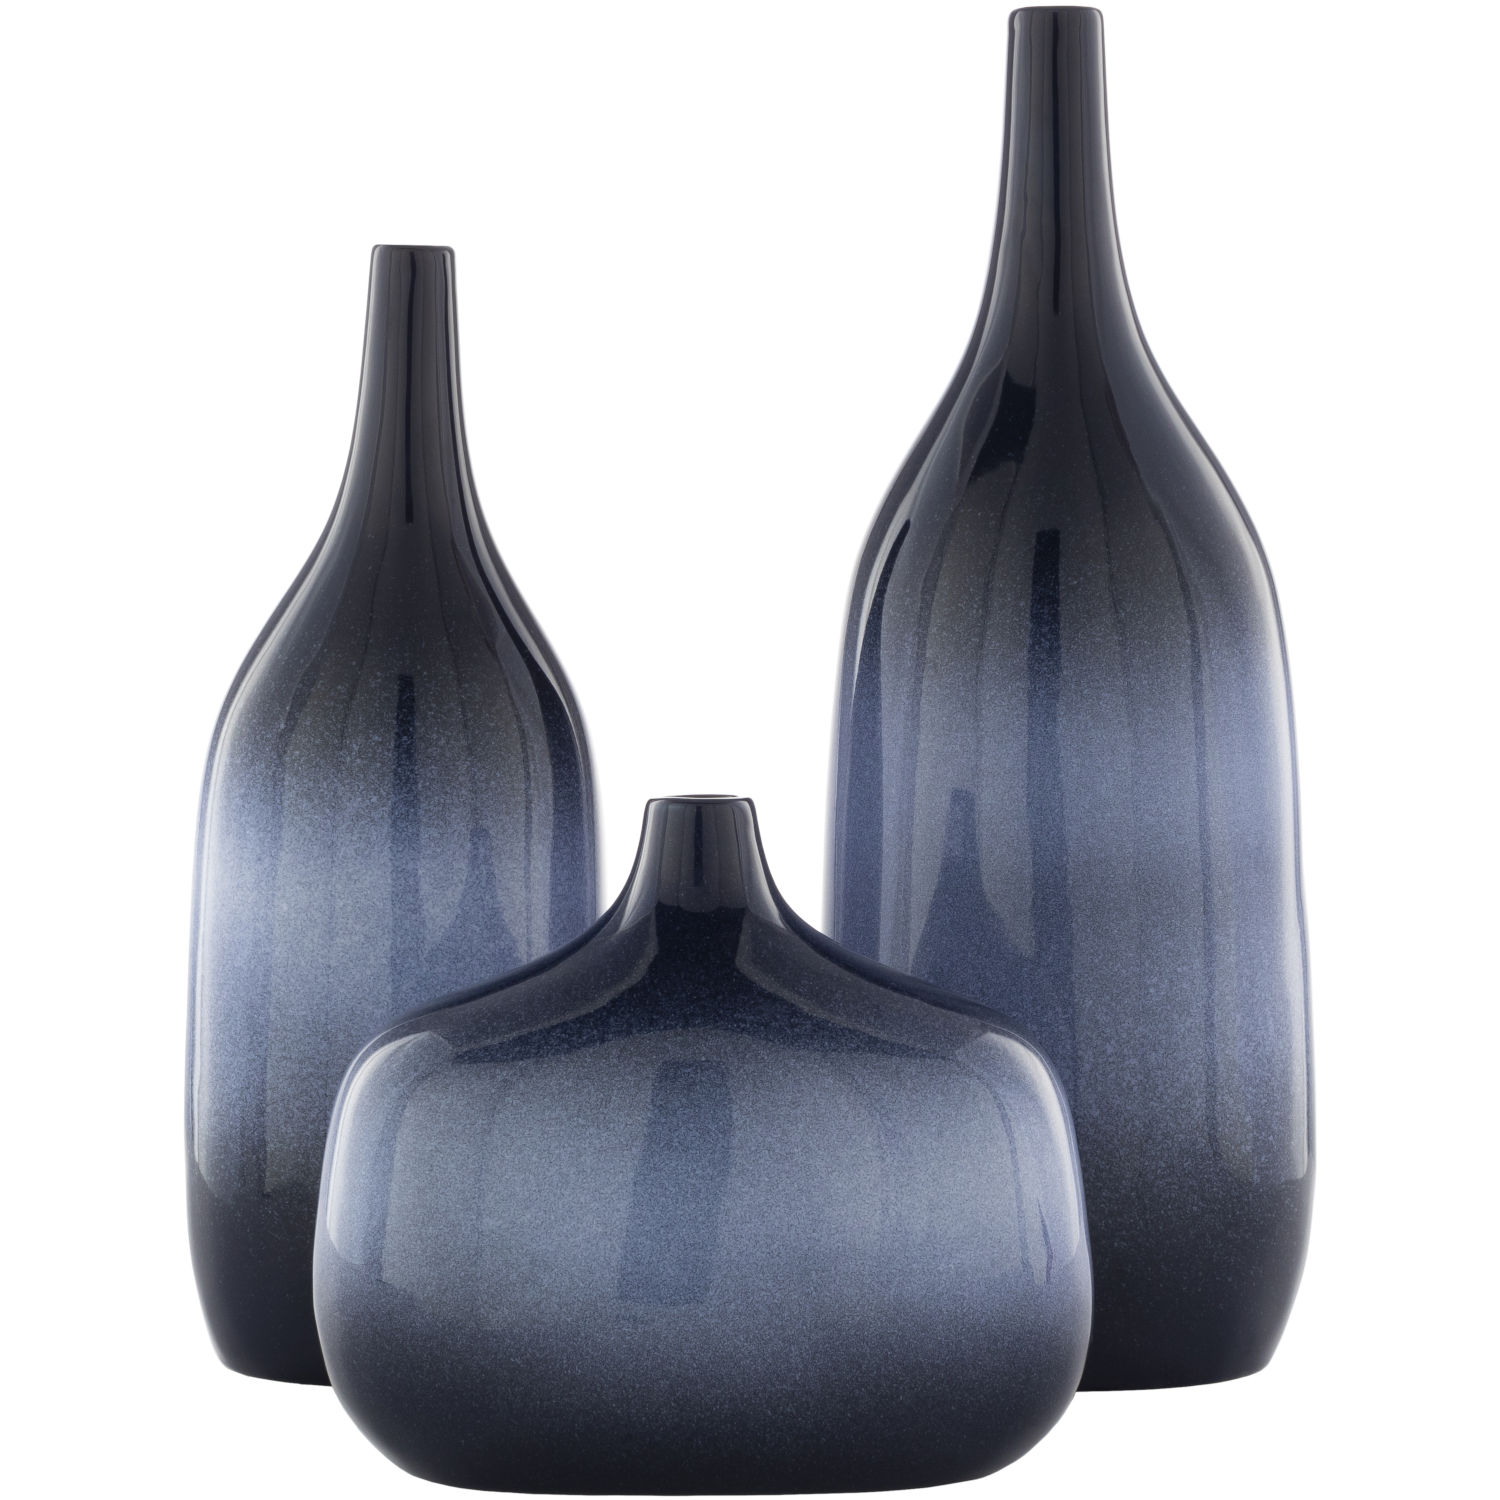 Vases Category